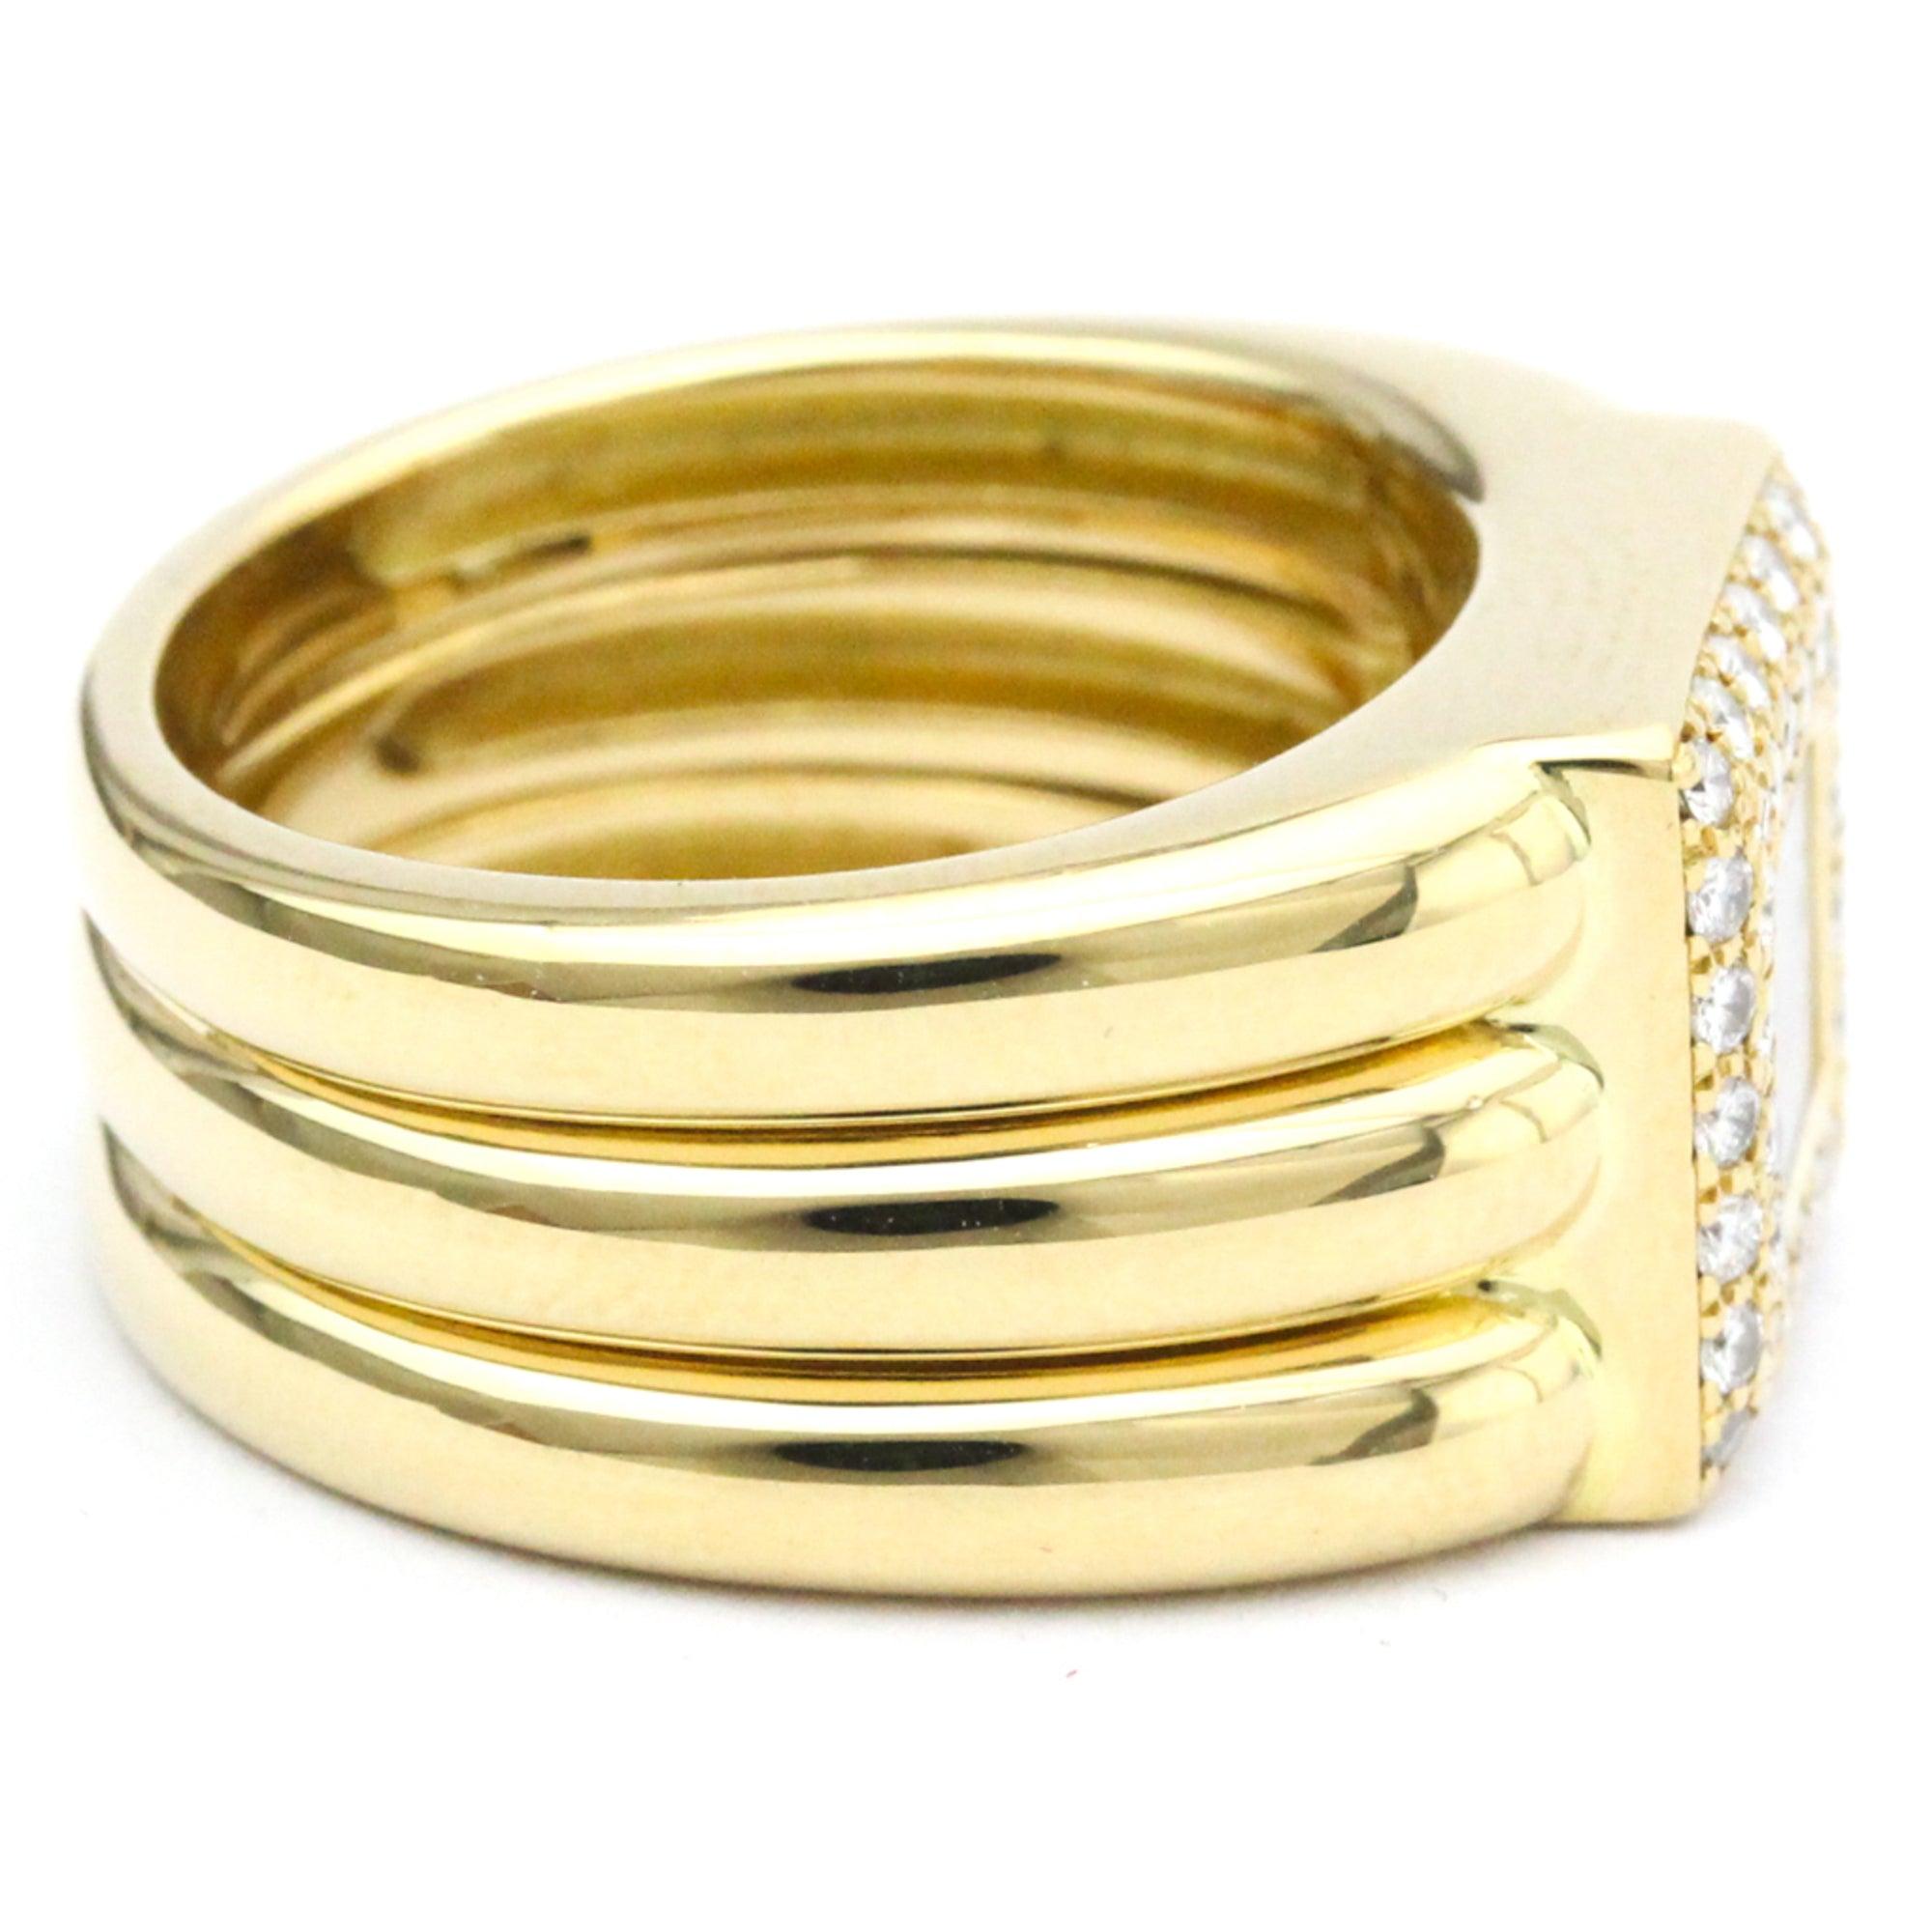 Women's or Men's Chopard Fashion Diamond Band Ring in 18K Yellow Gold For Sale